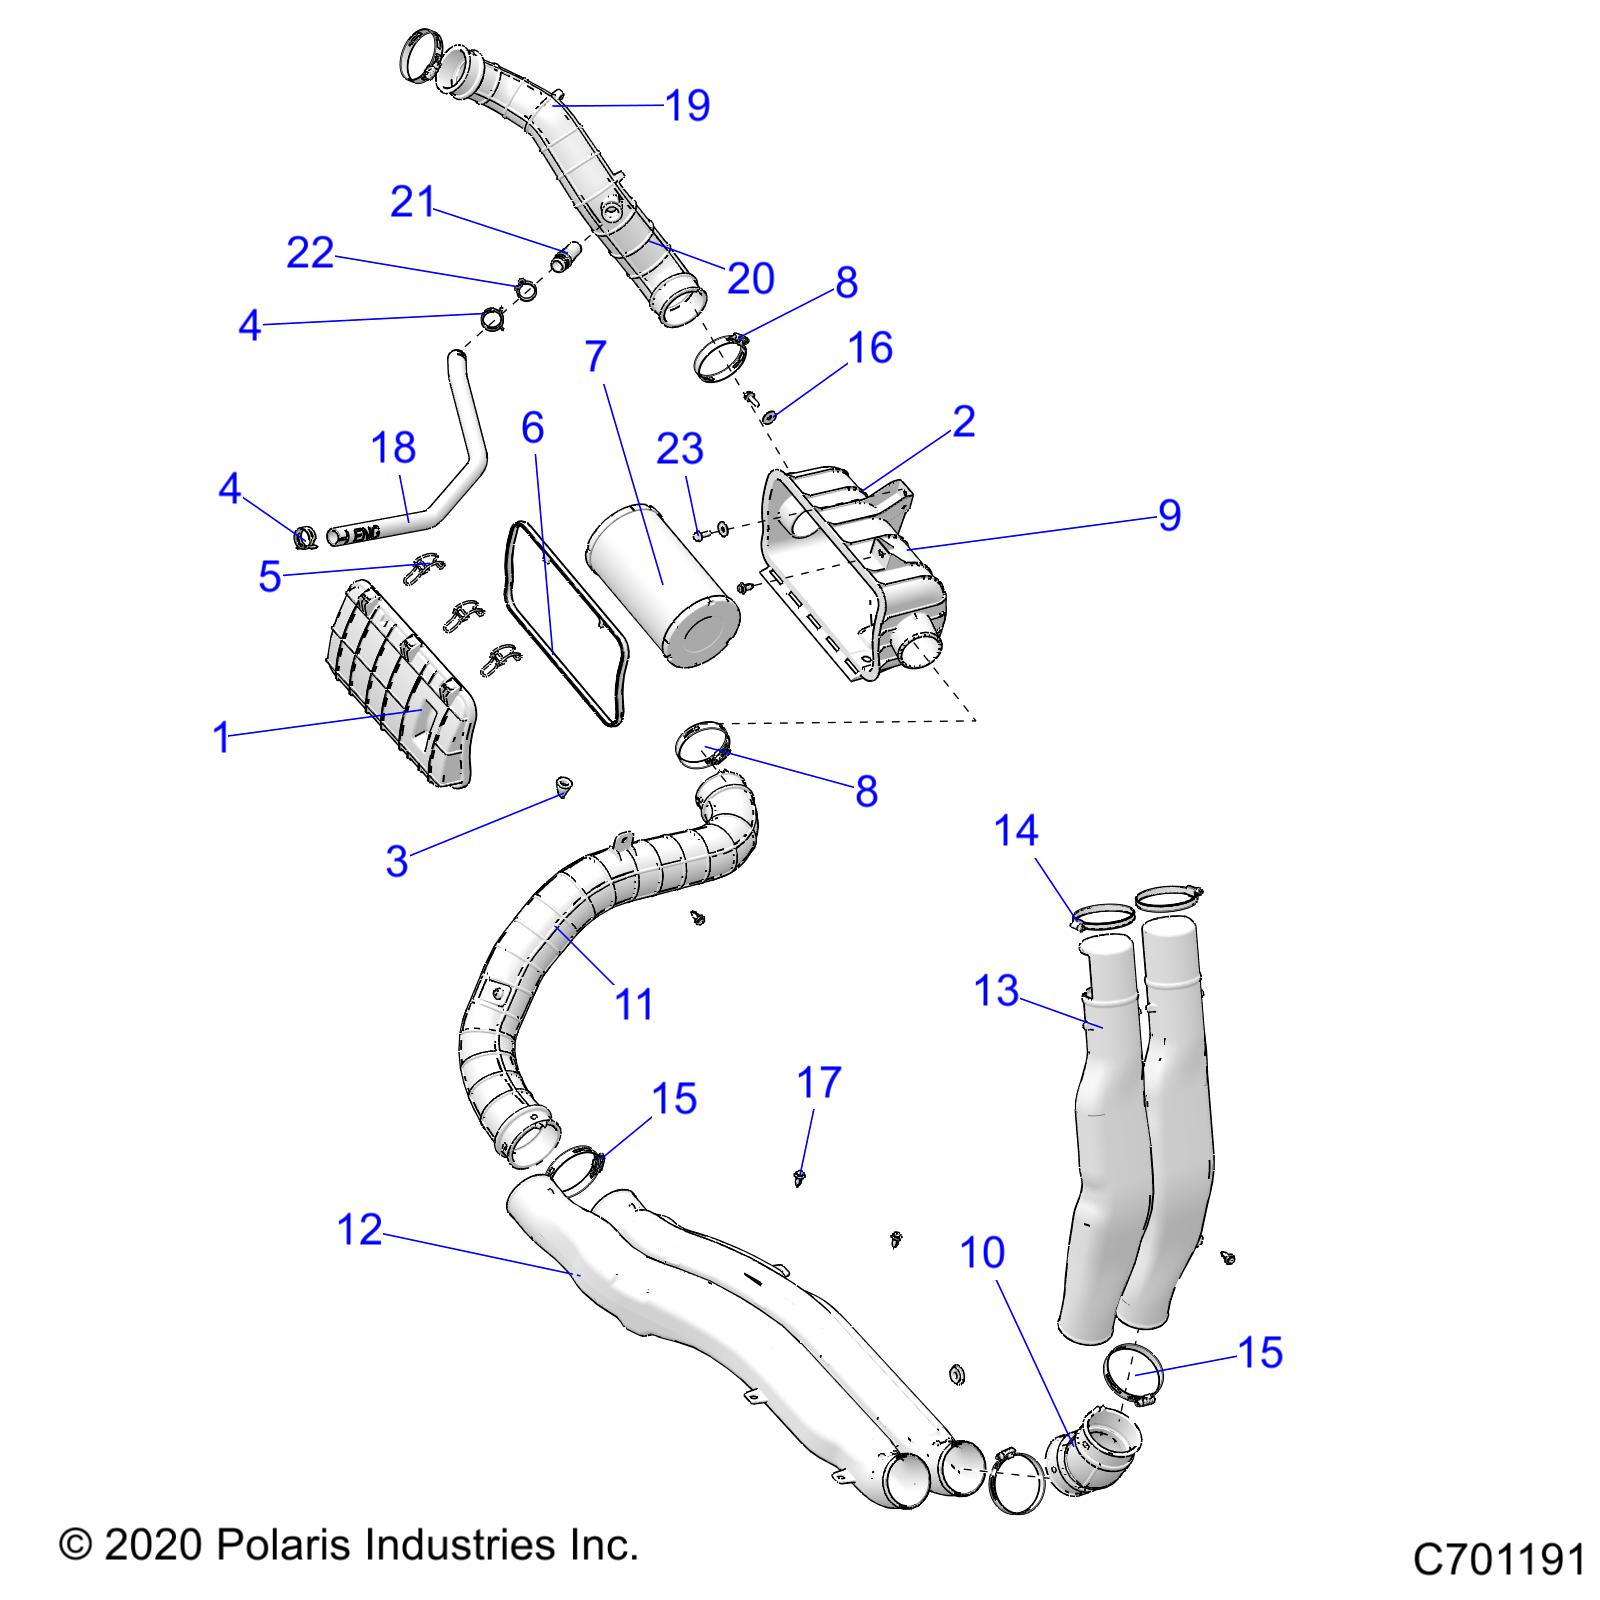 Part Number : 7082449 ASM-AIRBOX CLIP